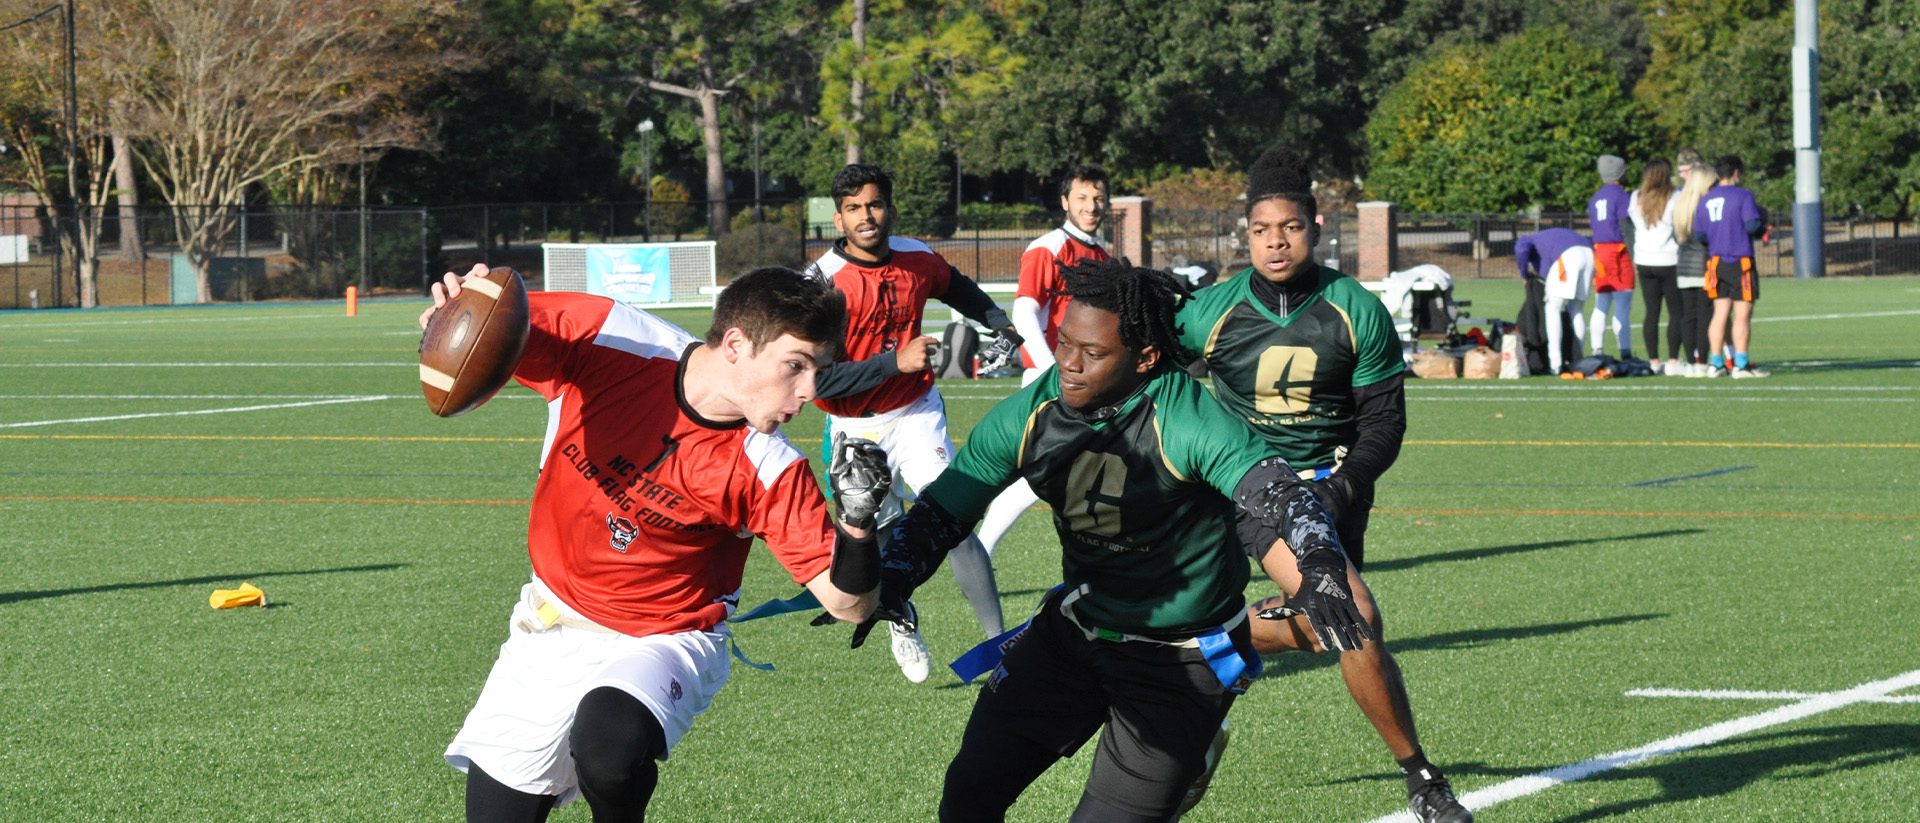 flag football player trying to pull flagg of other player with the ball